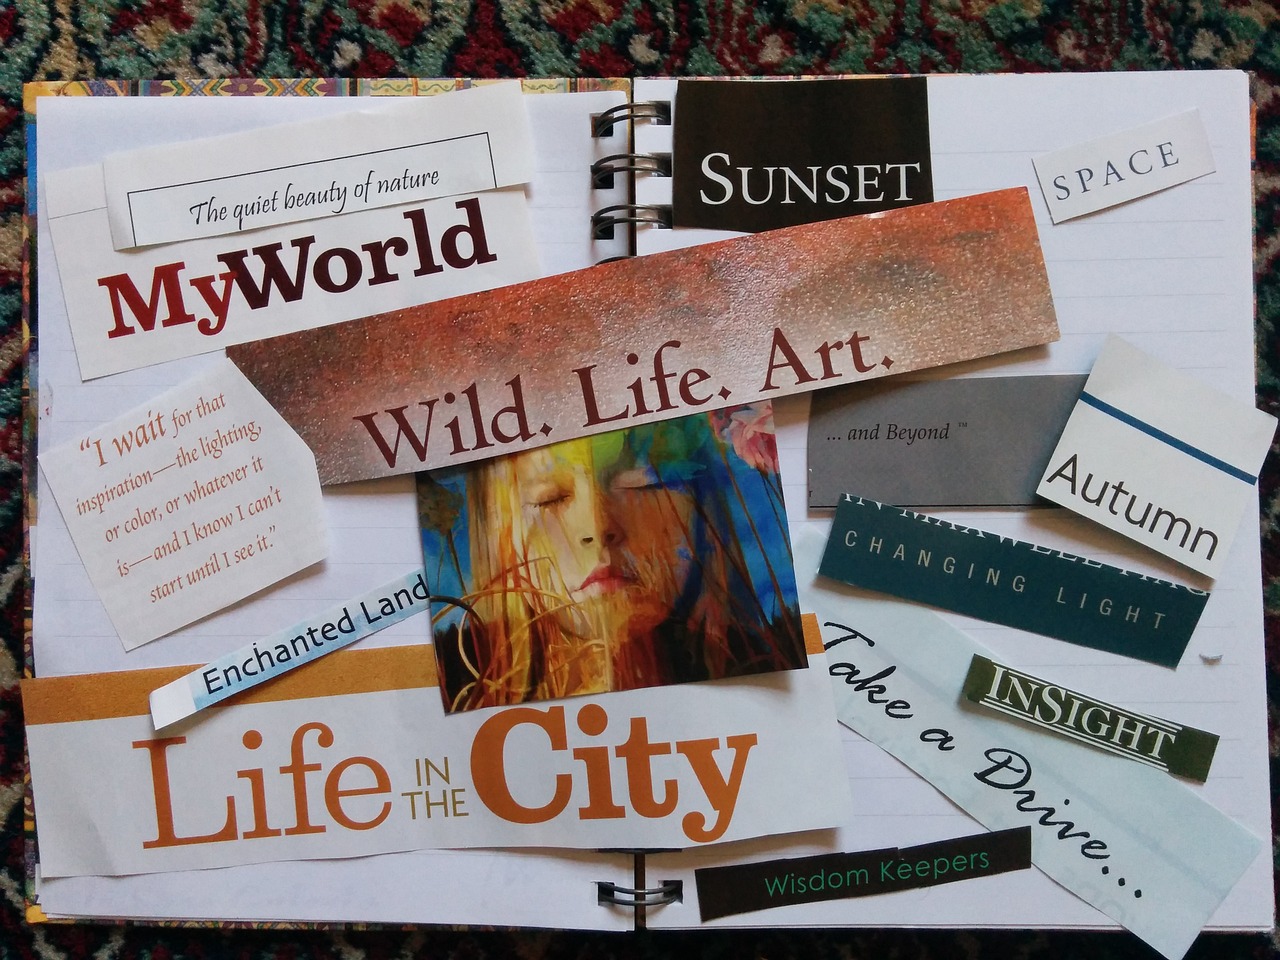 Vision Board Kit for Adults: Clip Art, Word Quotes, & Picture Supplies |  Creative Motivational Visualization Journal | Law of Attraction Guide |  Soft